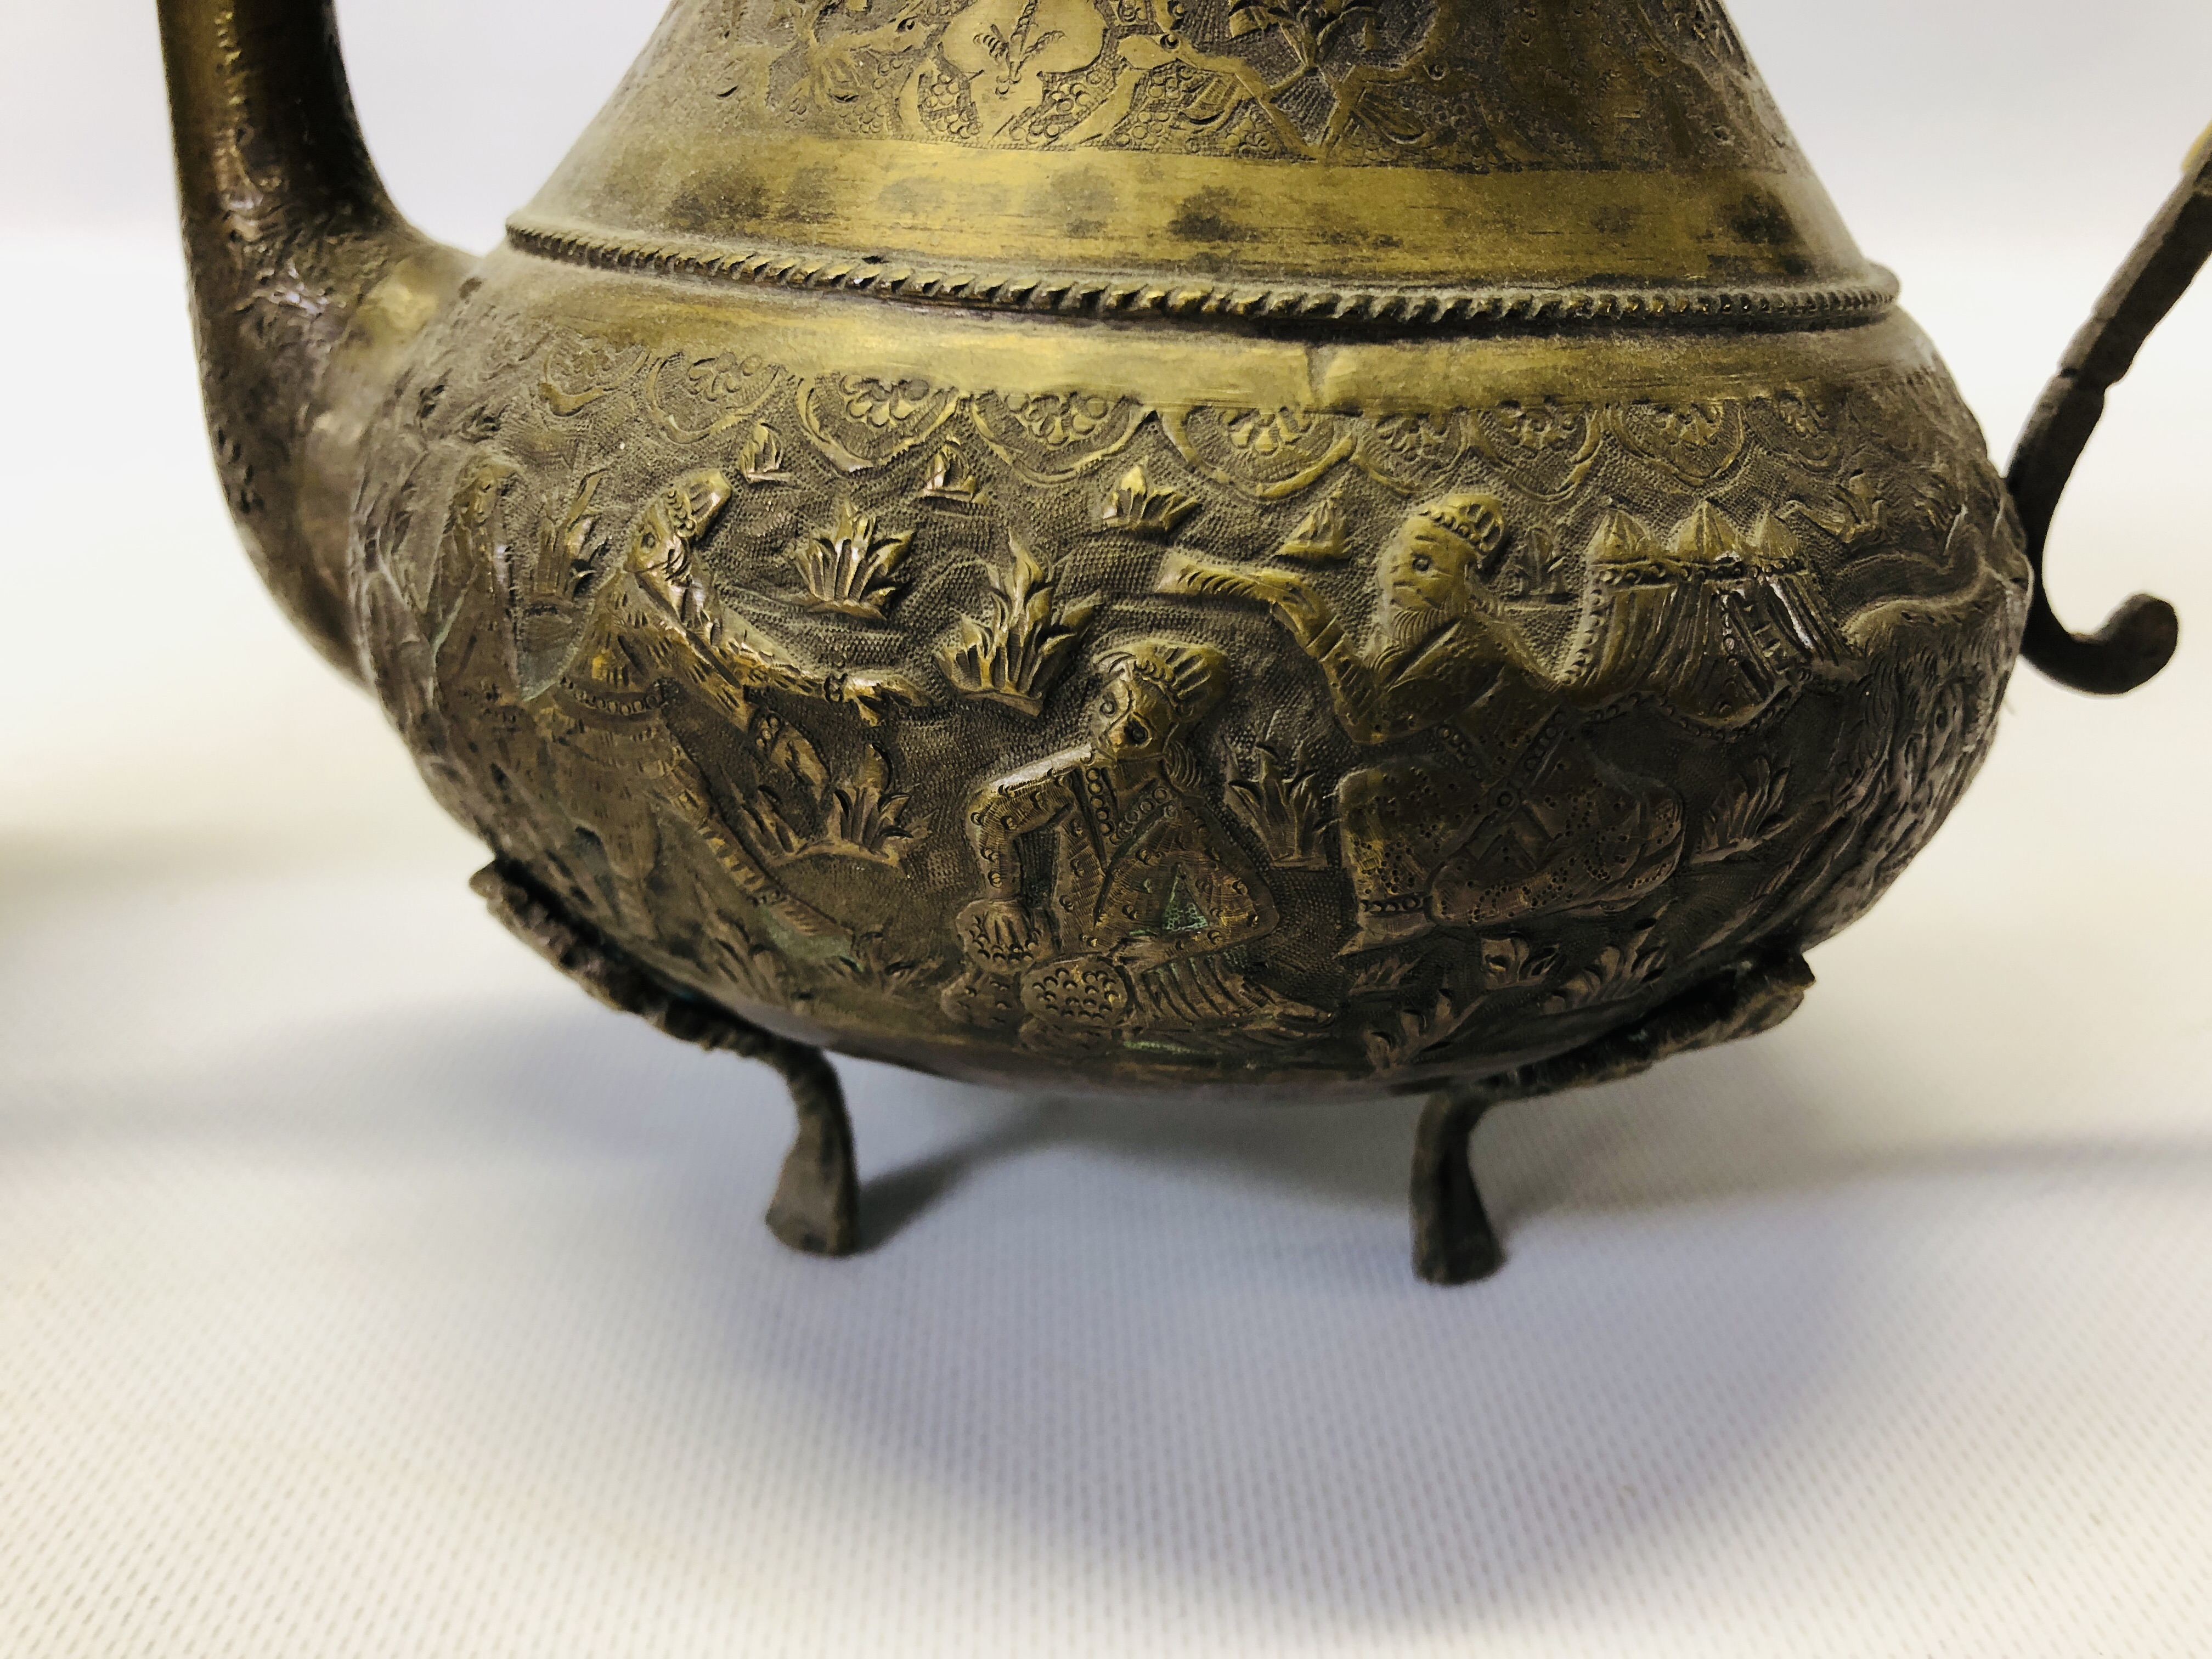 A VINTAGE MIDDLE EASTERN BRASS EWER ALONG WITH AN ELABORATE MIDDLE EASTERN BRASS COFFEE POT. - Image 4 of 21